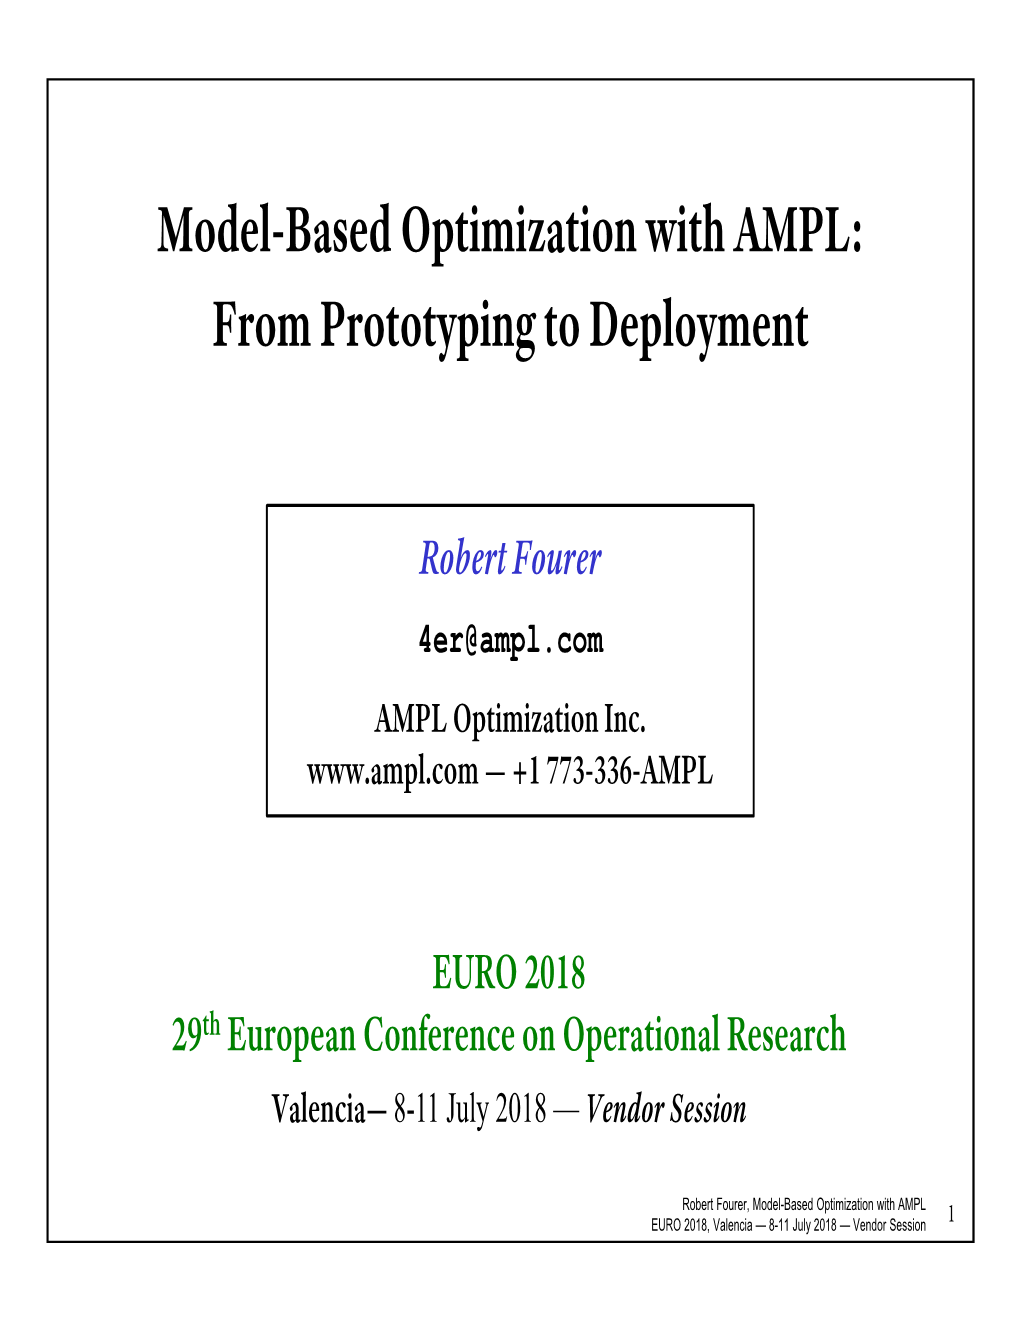 Model-Based Optimization with AMPL: from Prototyping to Deployment